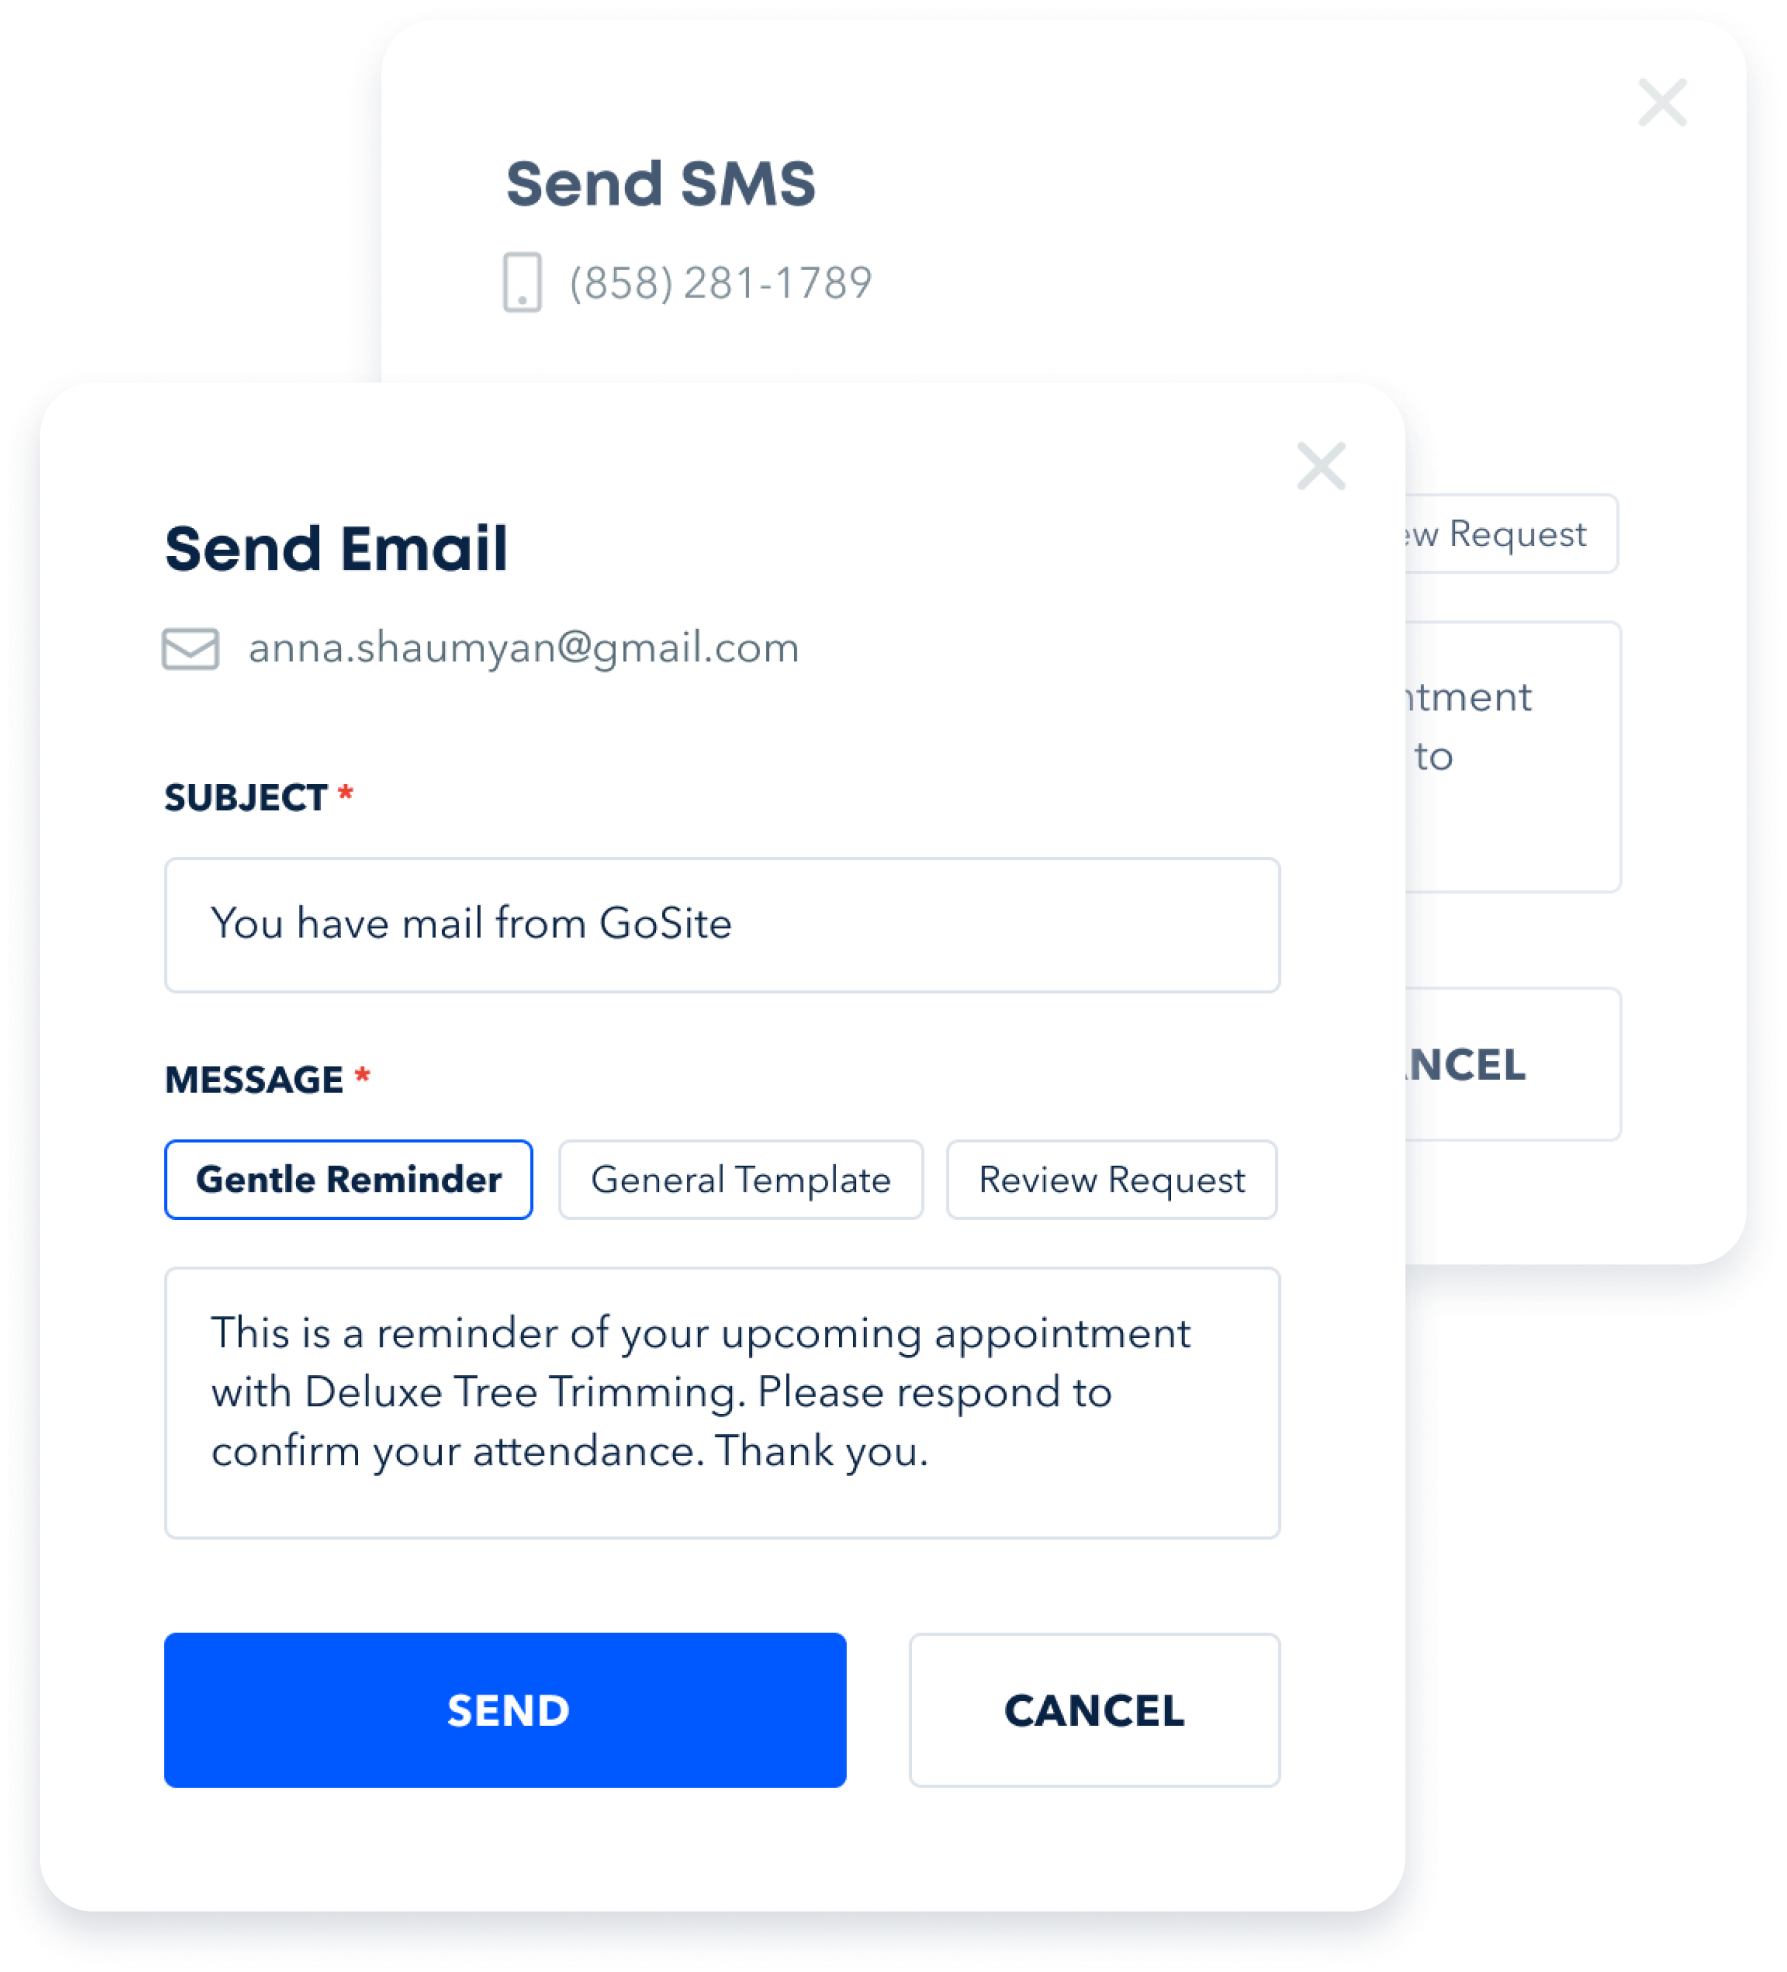 One-click Messaging and Invoicing